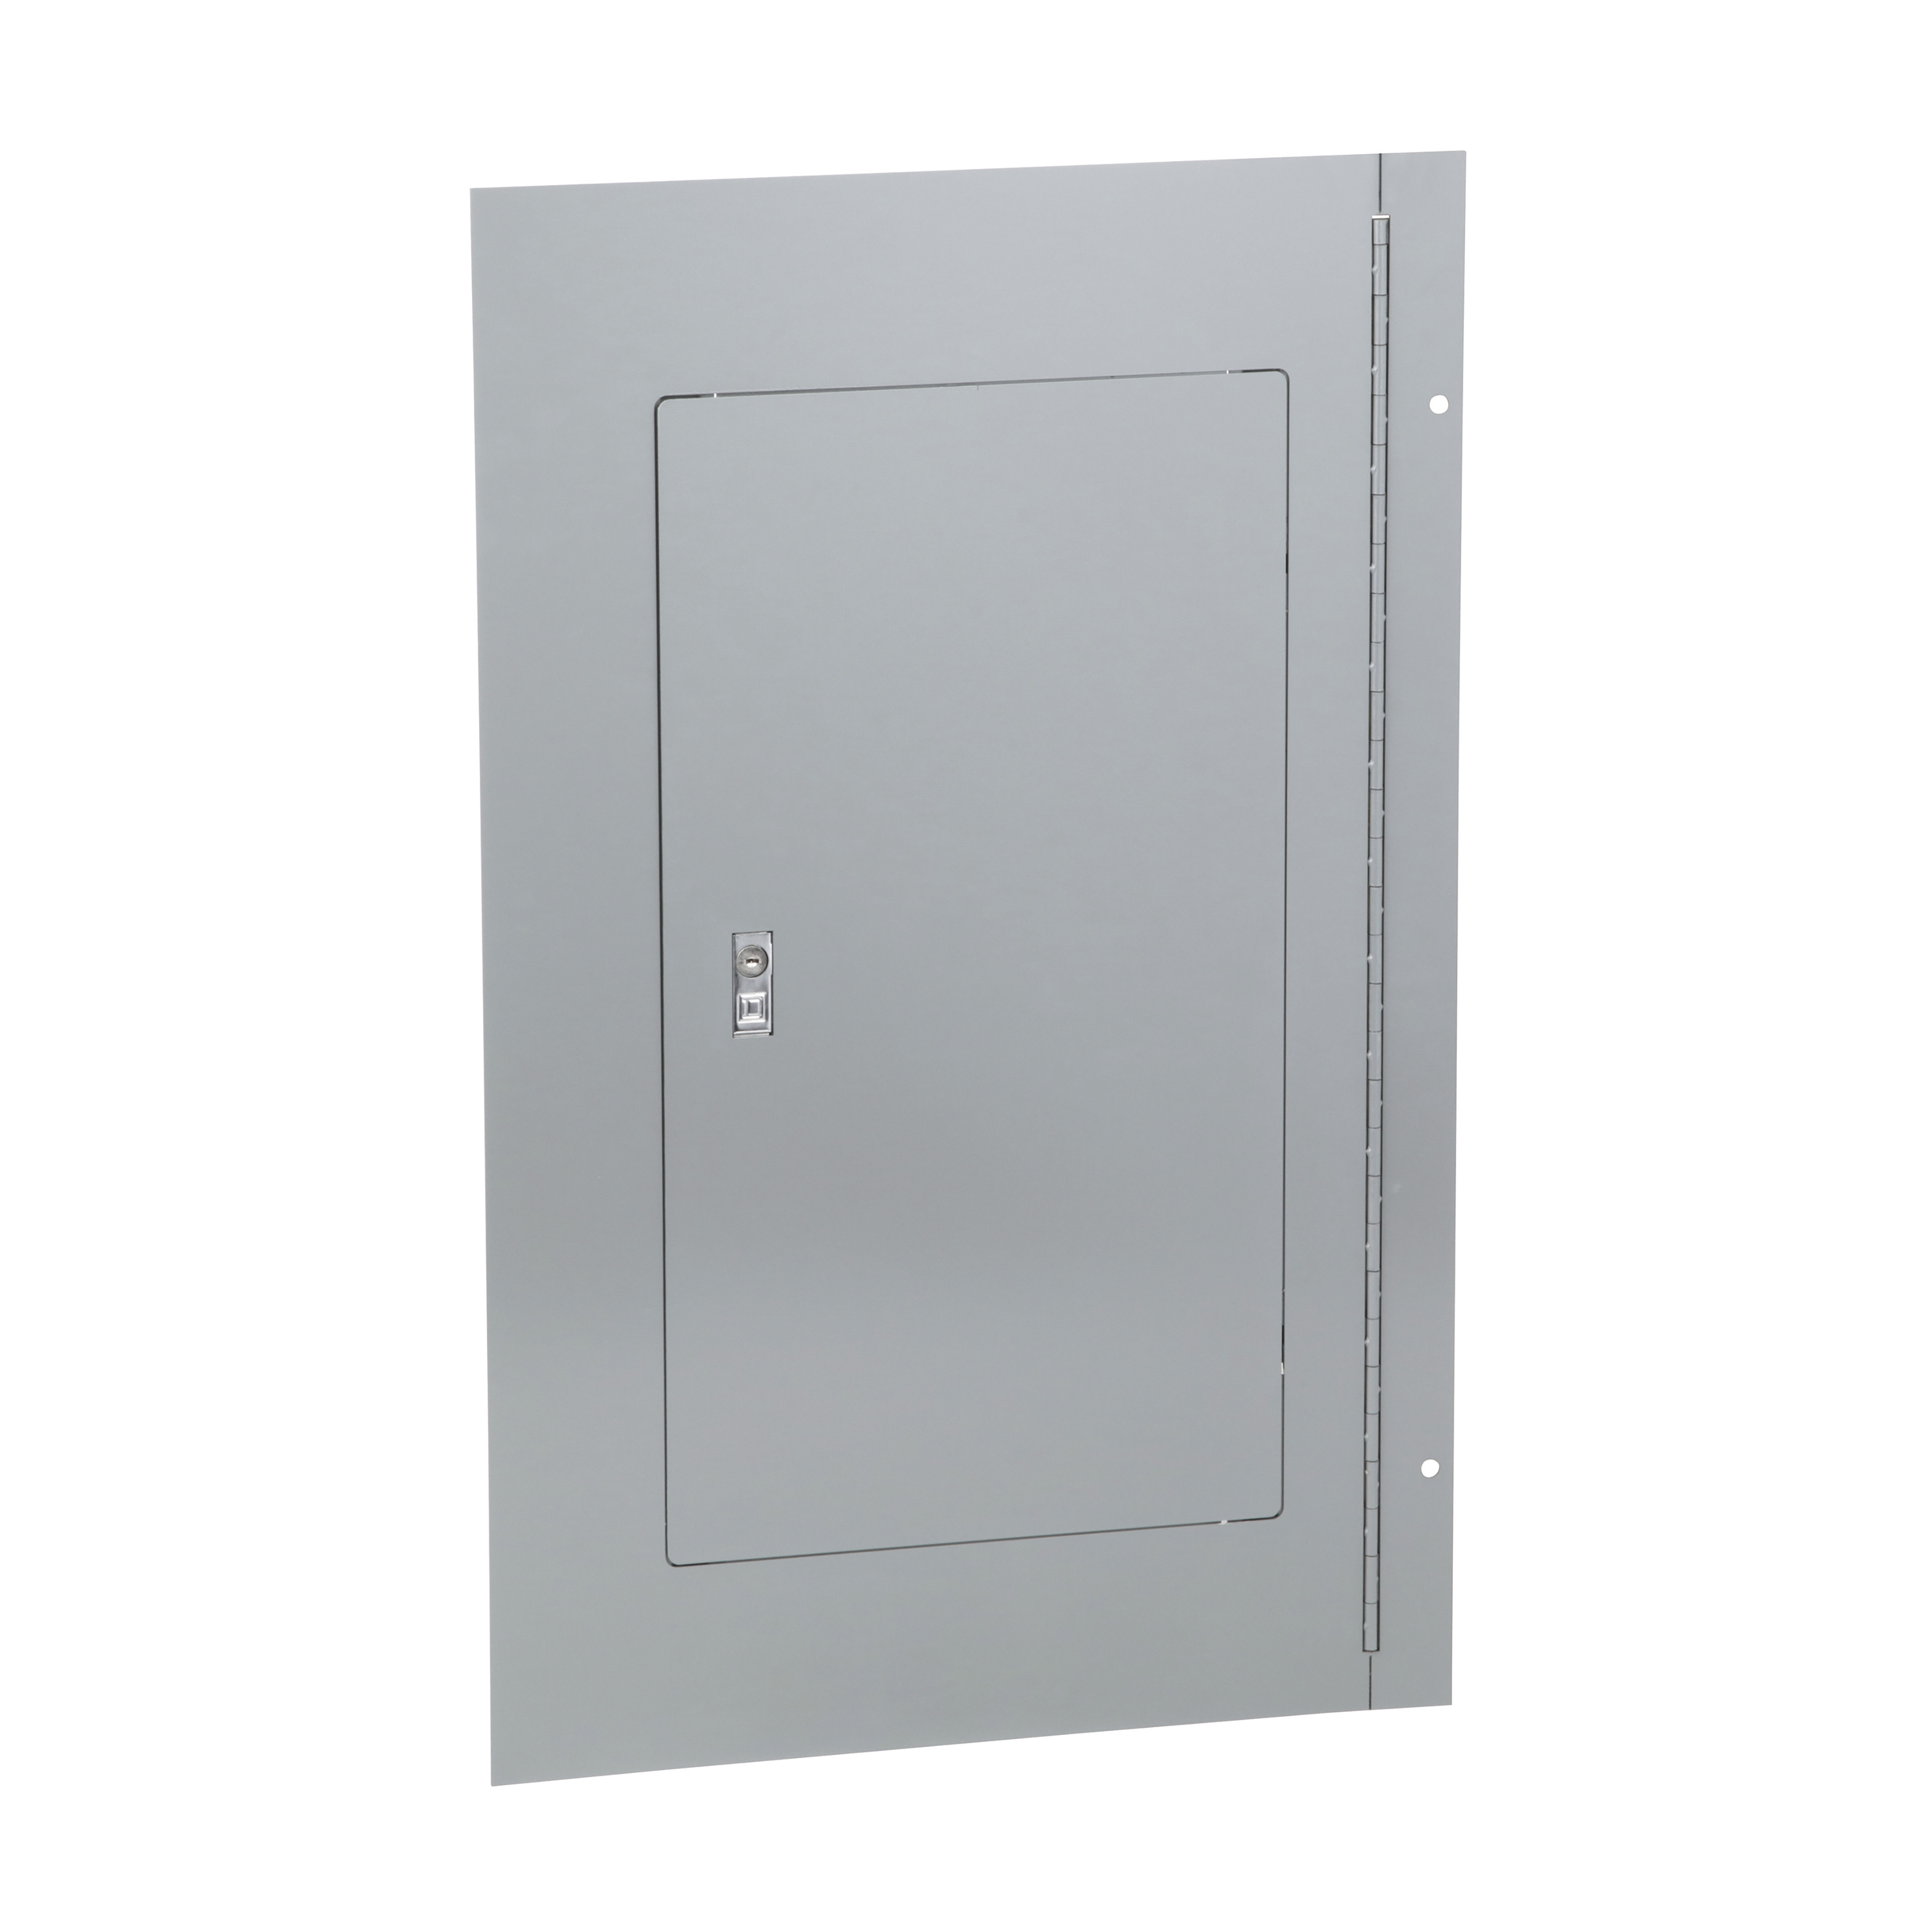 Enclosure cover, NQ and NF panelboards, NEMA 1, surface, hinged, 20in W x 32in H